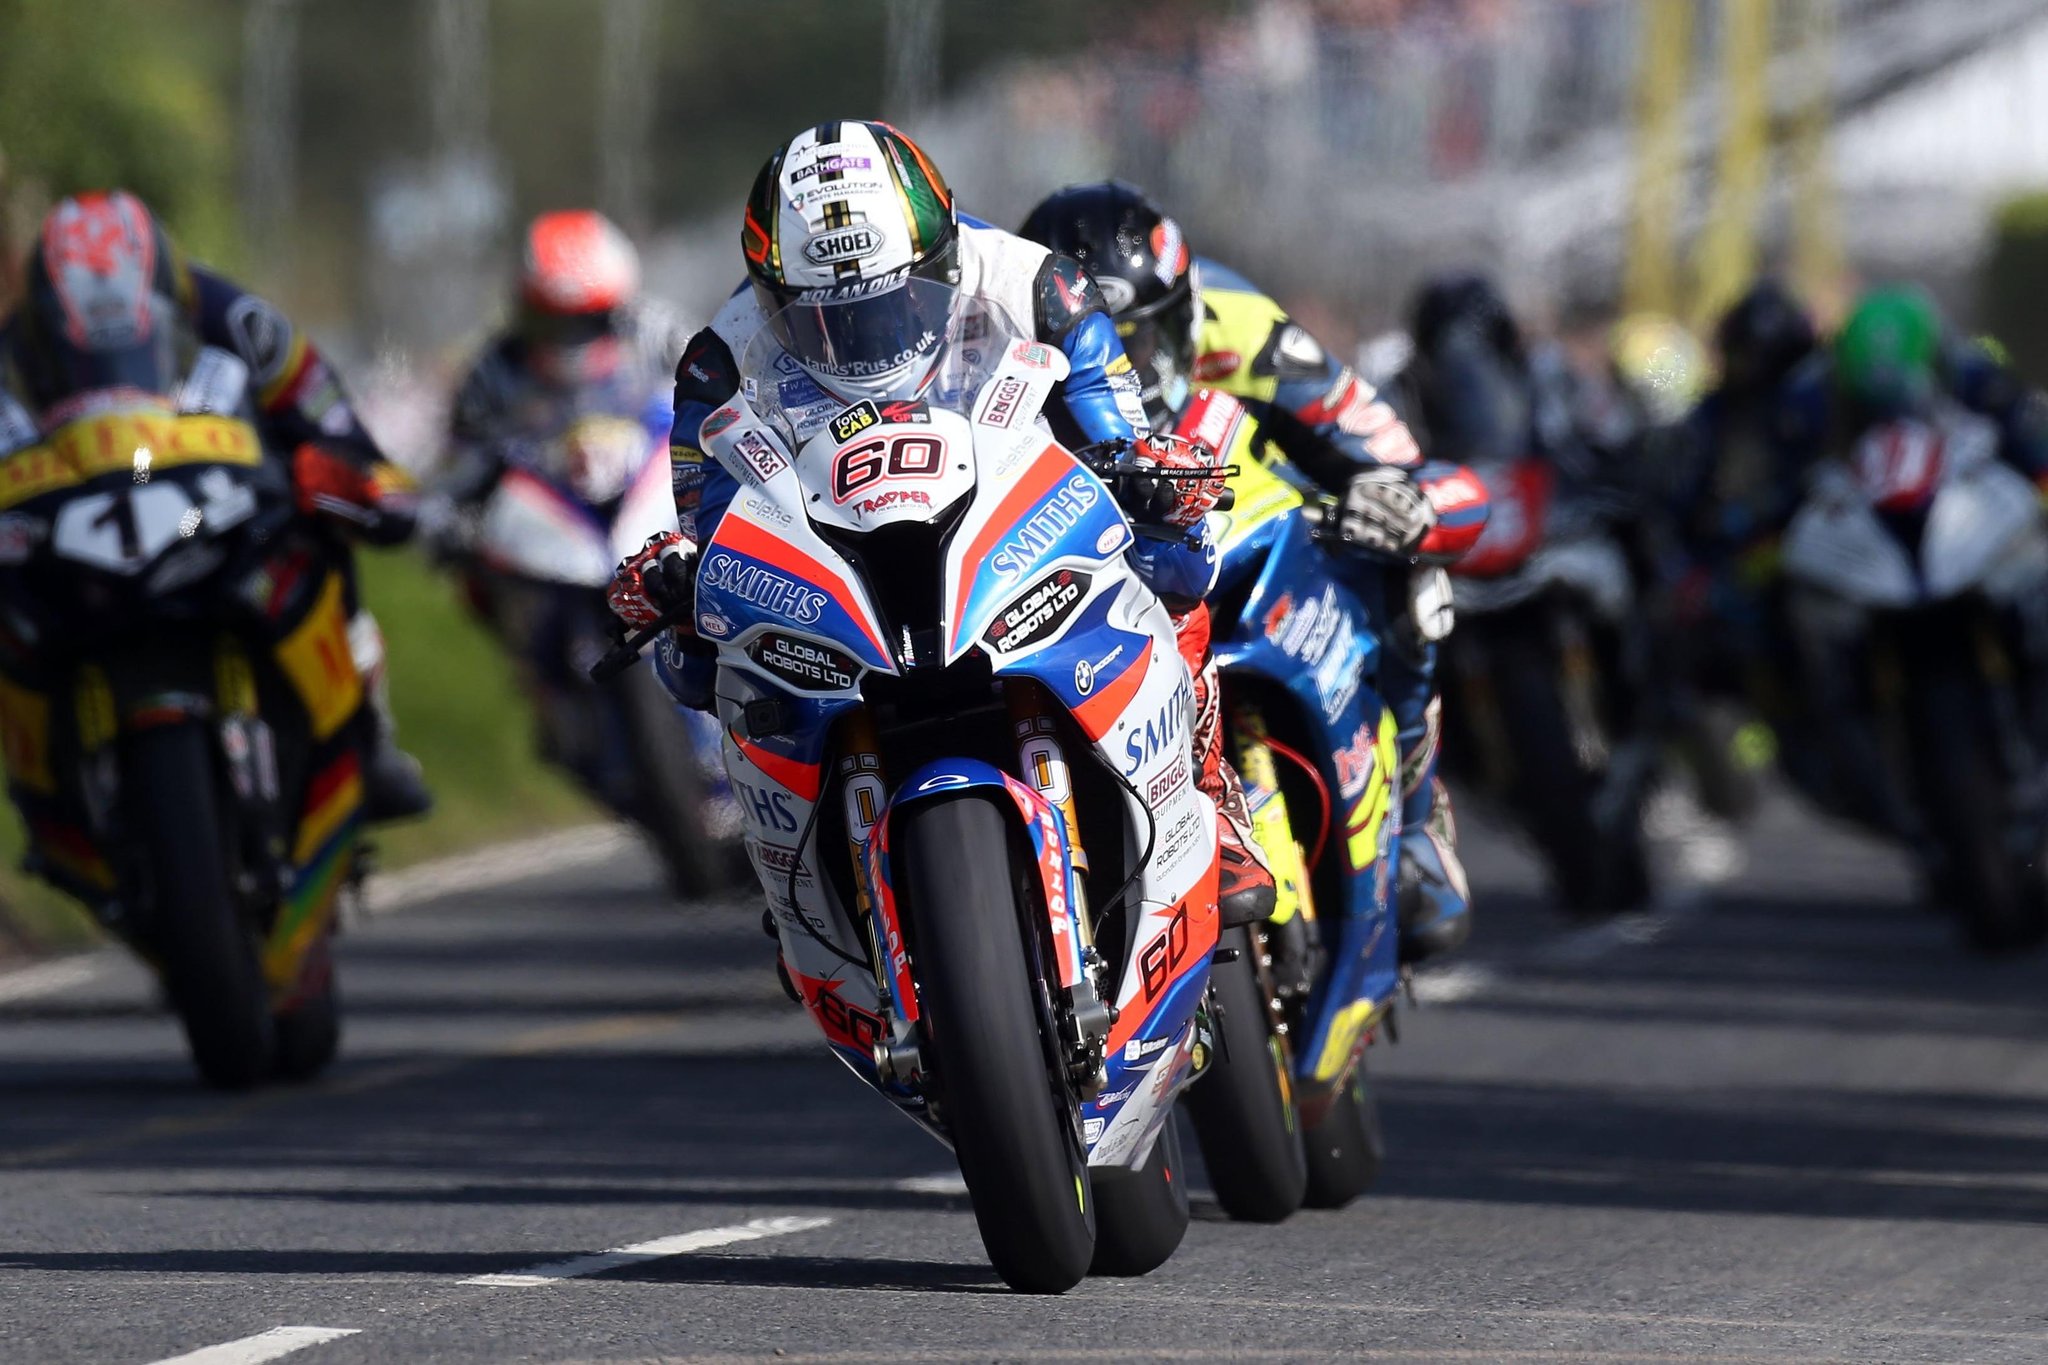 'Questions for Tourism NI' on failed UGP bid